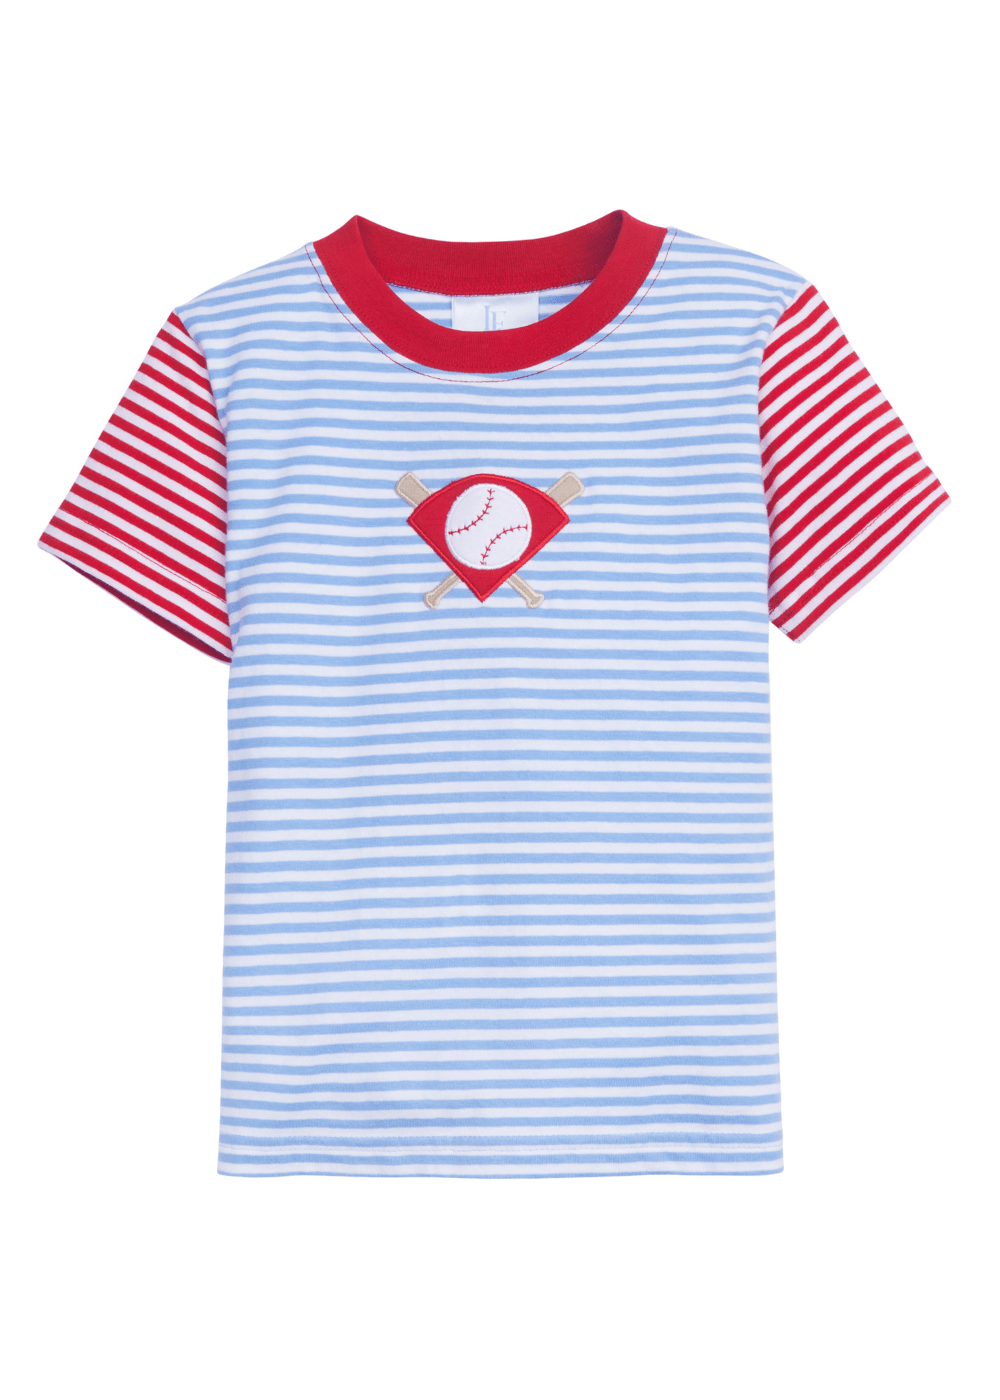 classic childrens clothing boys blue and white striped t-shirt with red sleeves and baseball applique